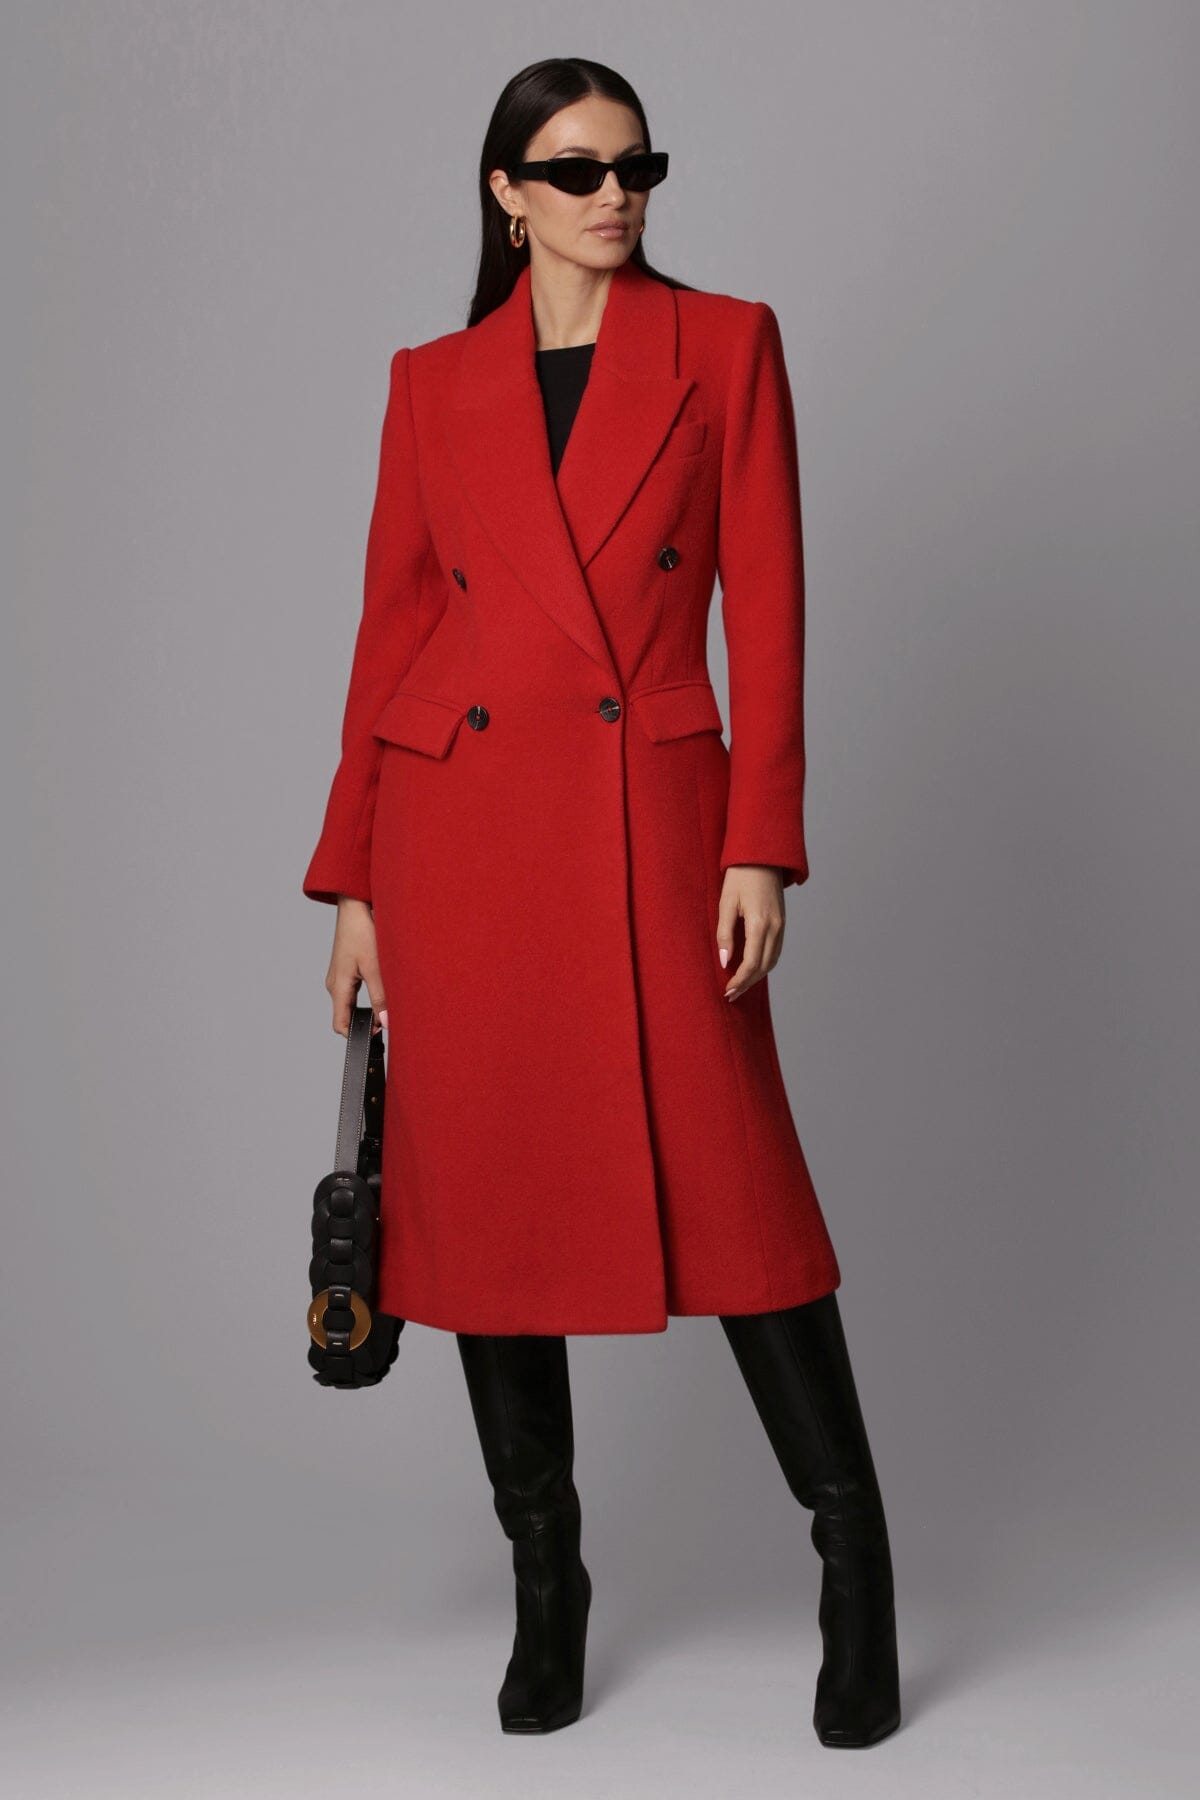 Crimson red wool blend double breasted tailored coat jacket - figure flattering work appropriate coats jackets for women